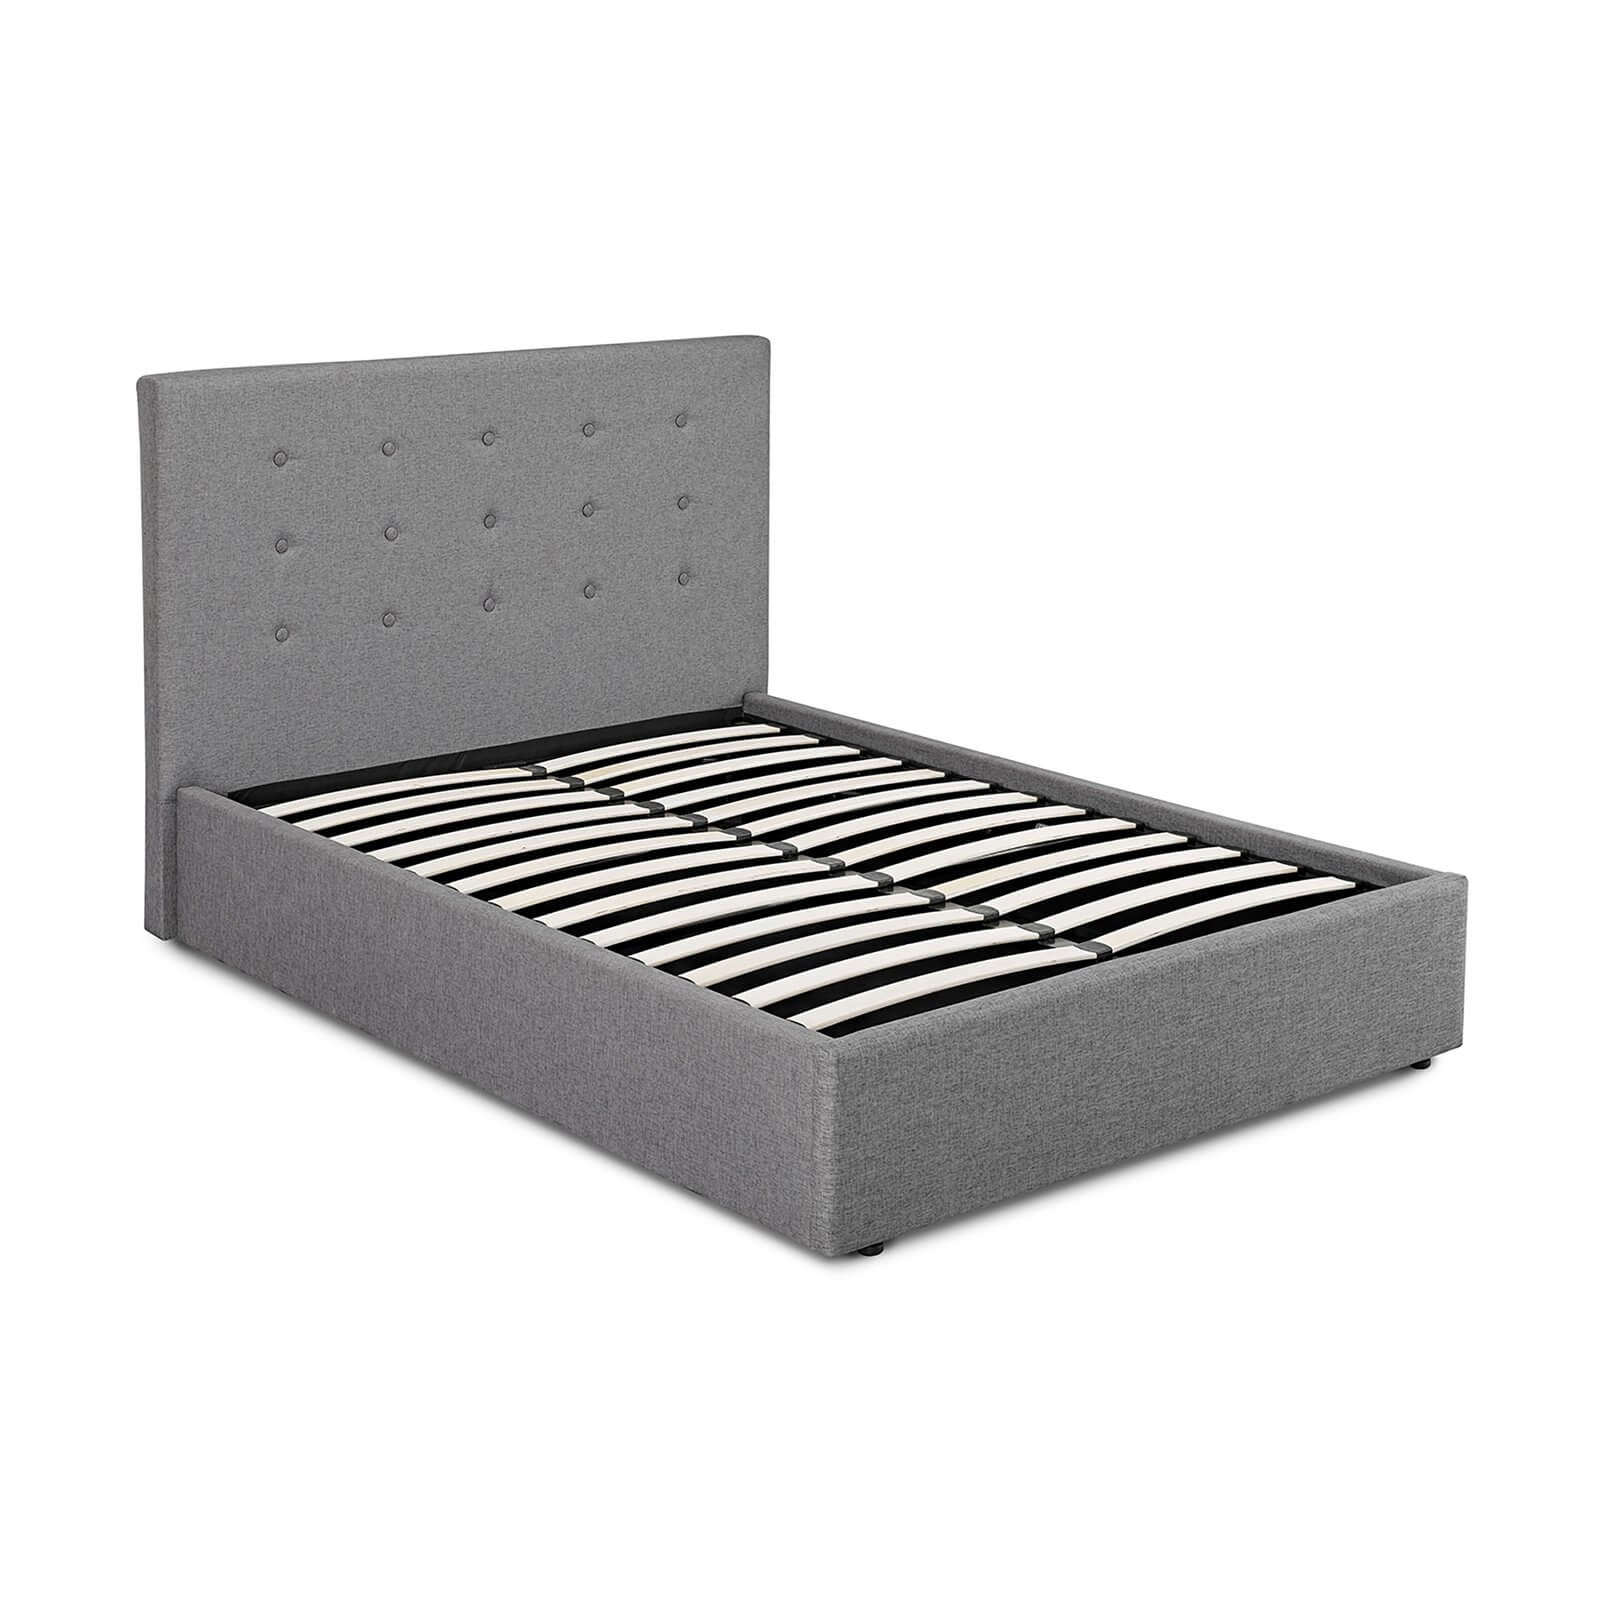 Lucca Lift Kingsize Bed - Grey